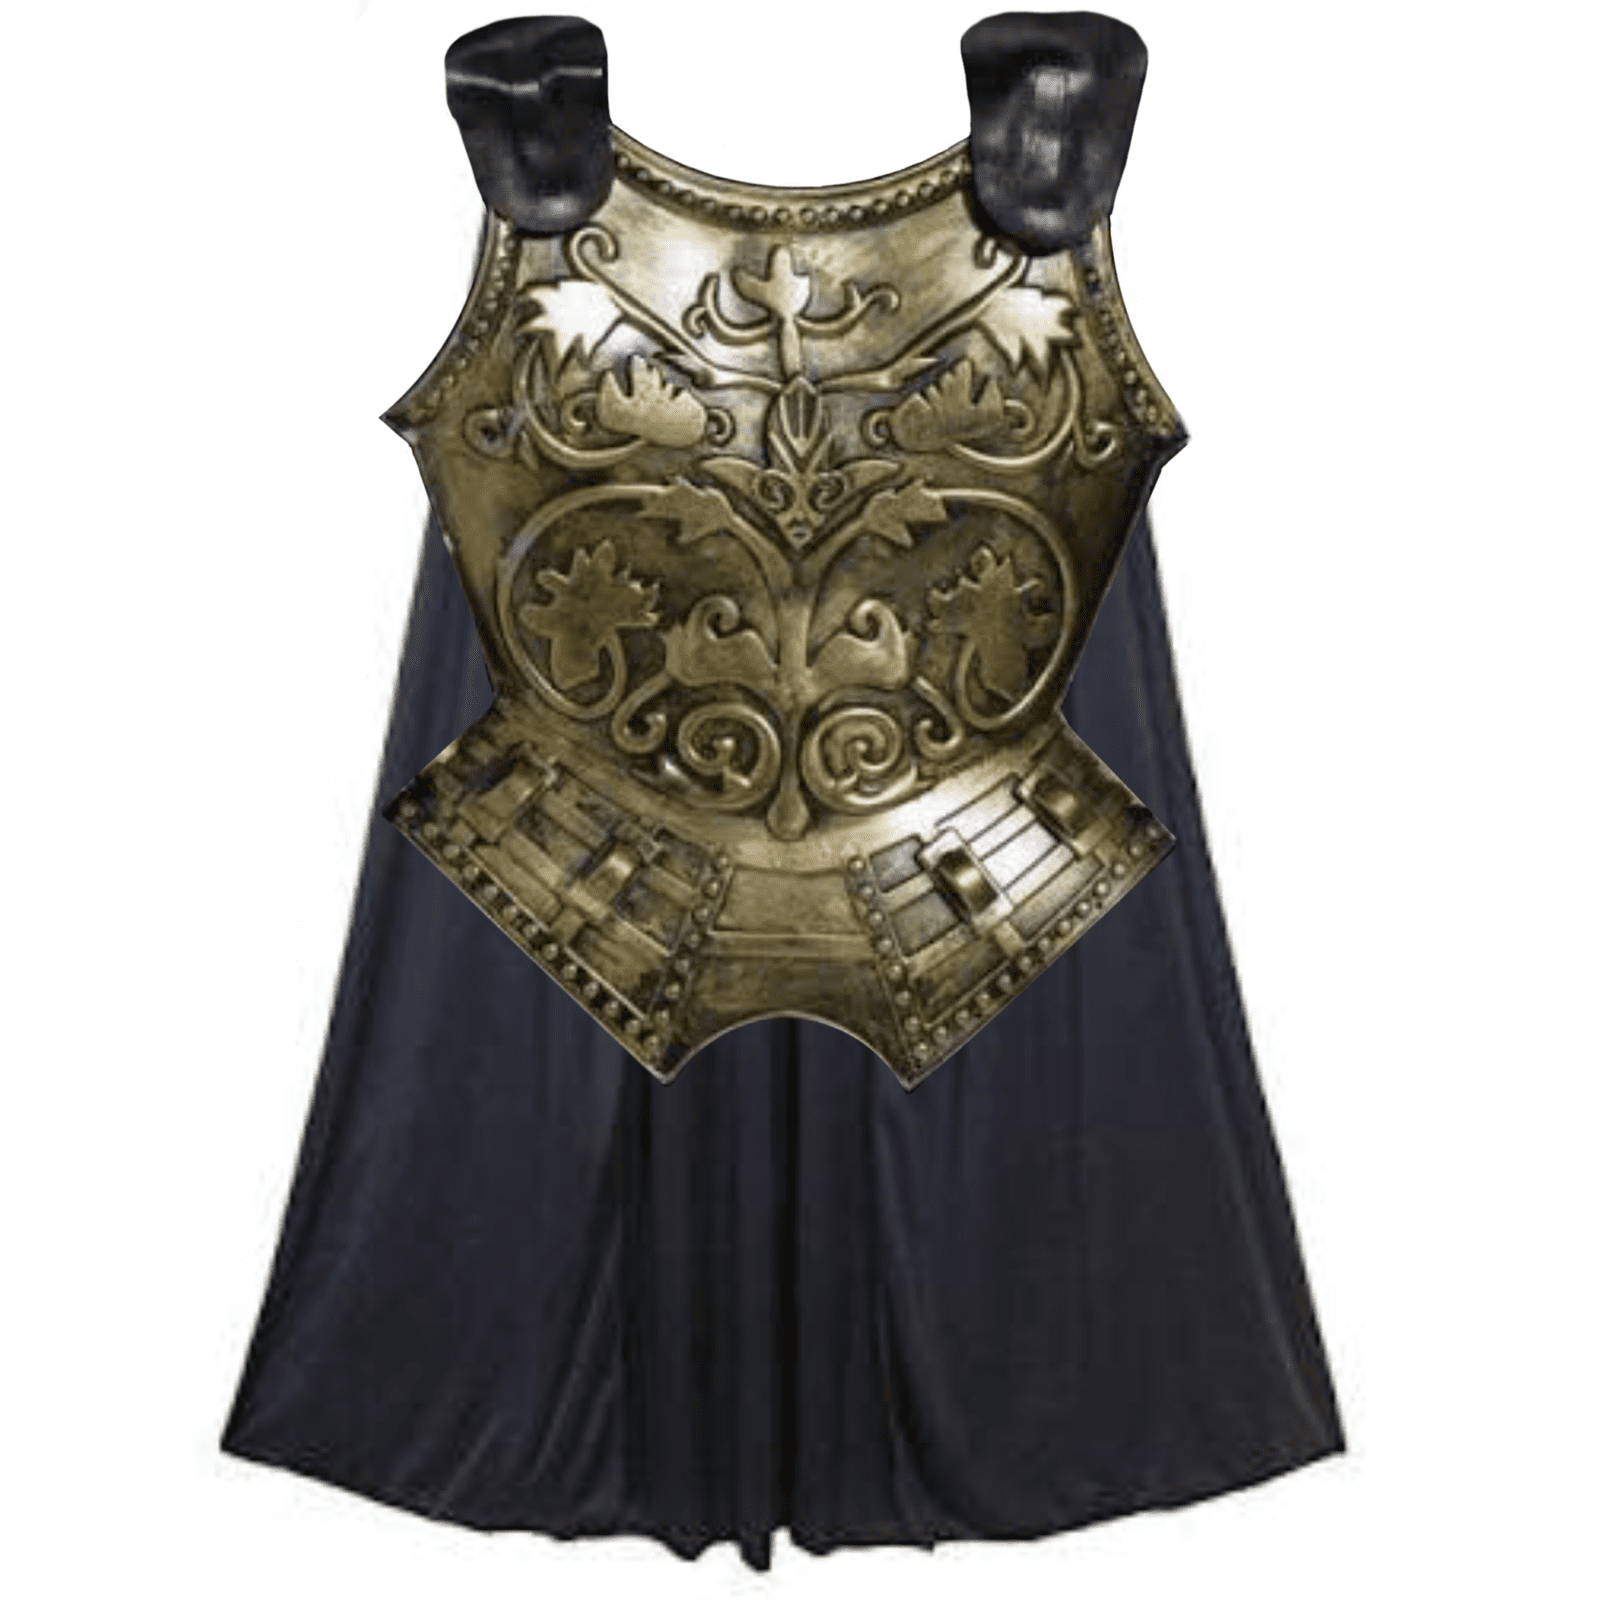 Featured image for “Roman Chest Armour w/ Cape”